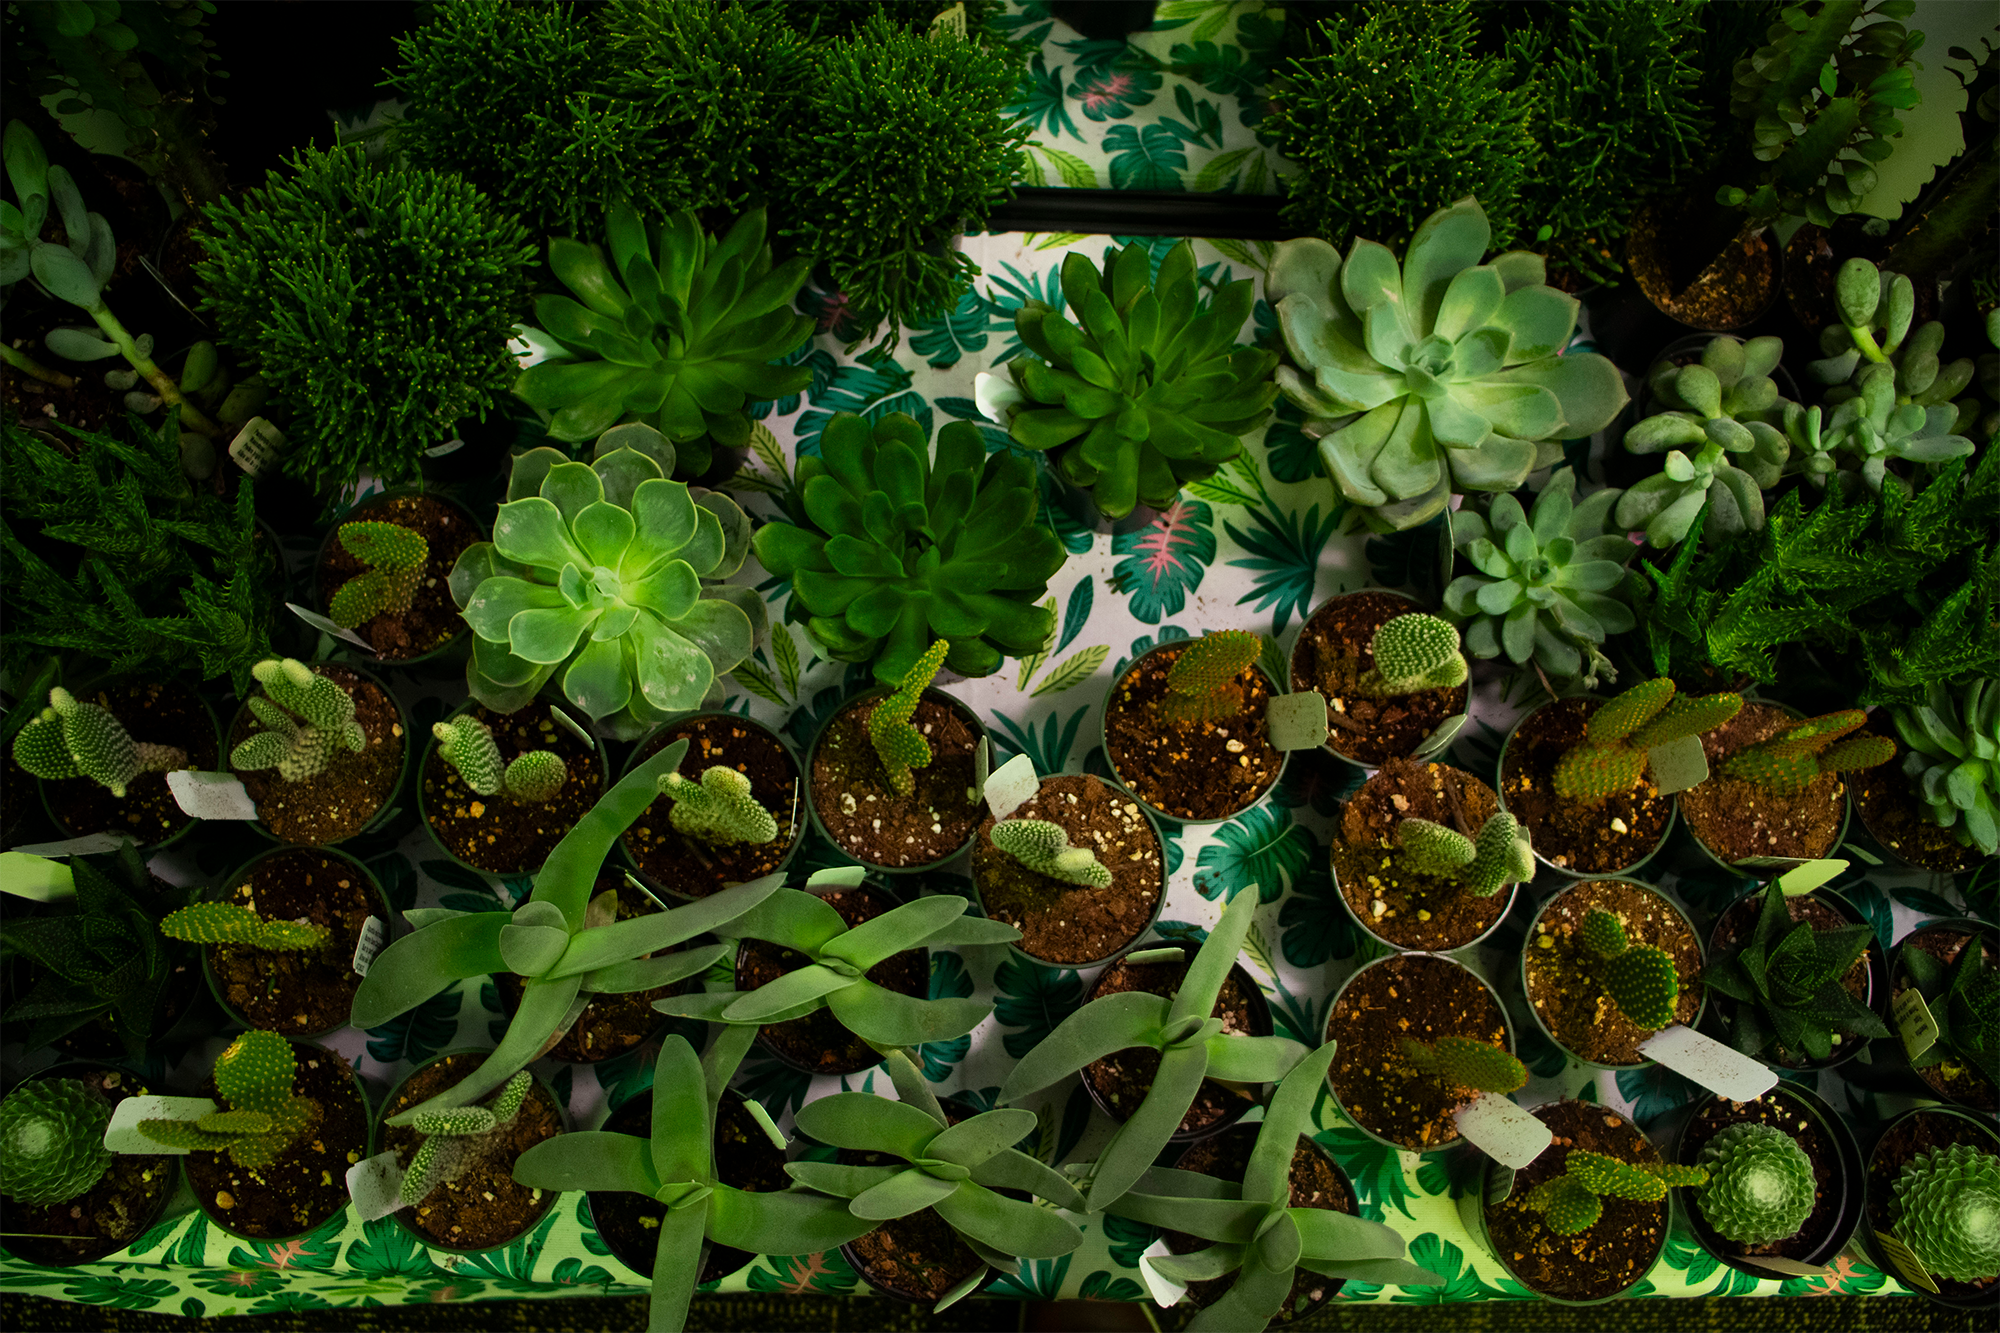 A display of plants within Green Society.